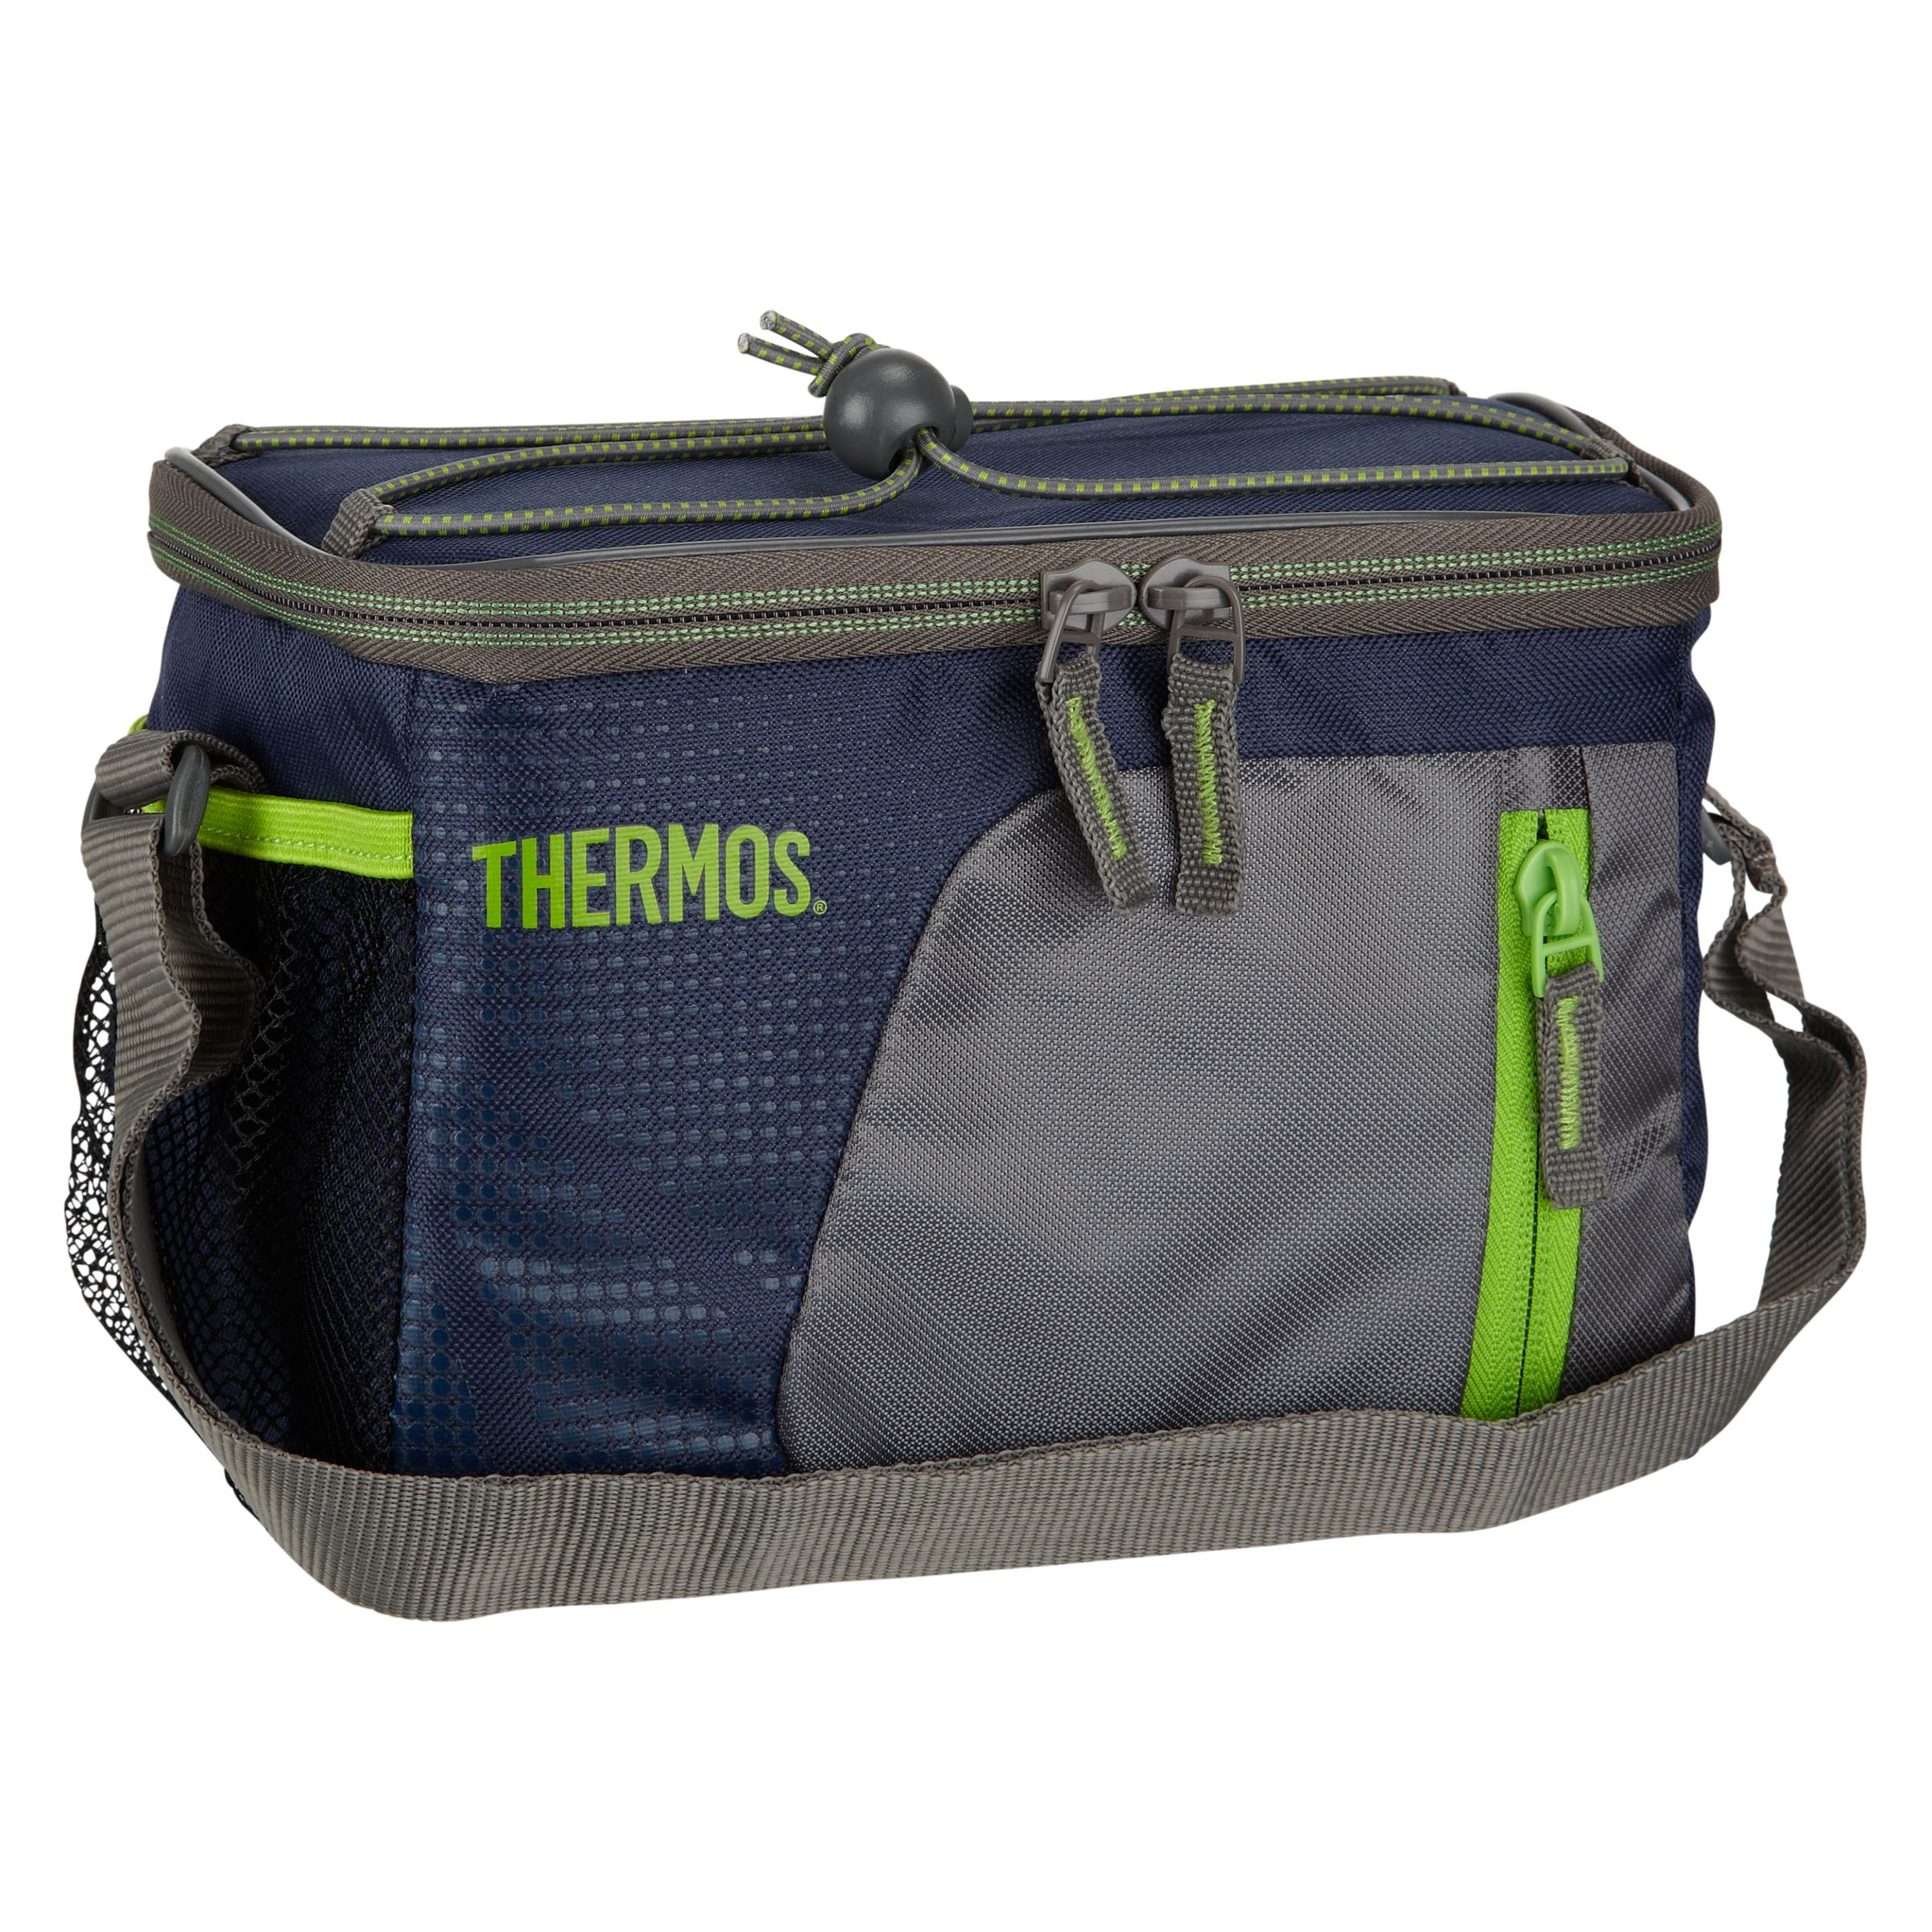 Thermos Personal Coolbag, Blue